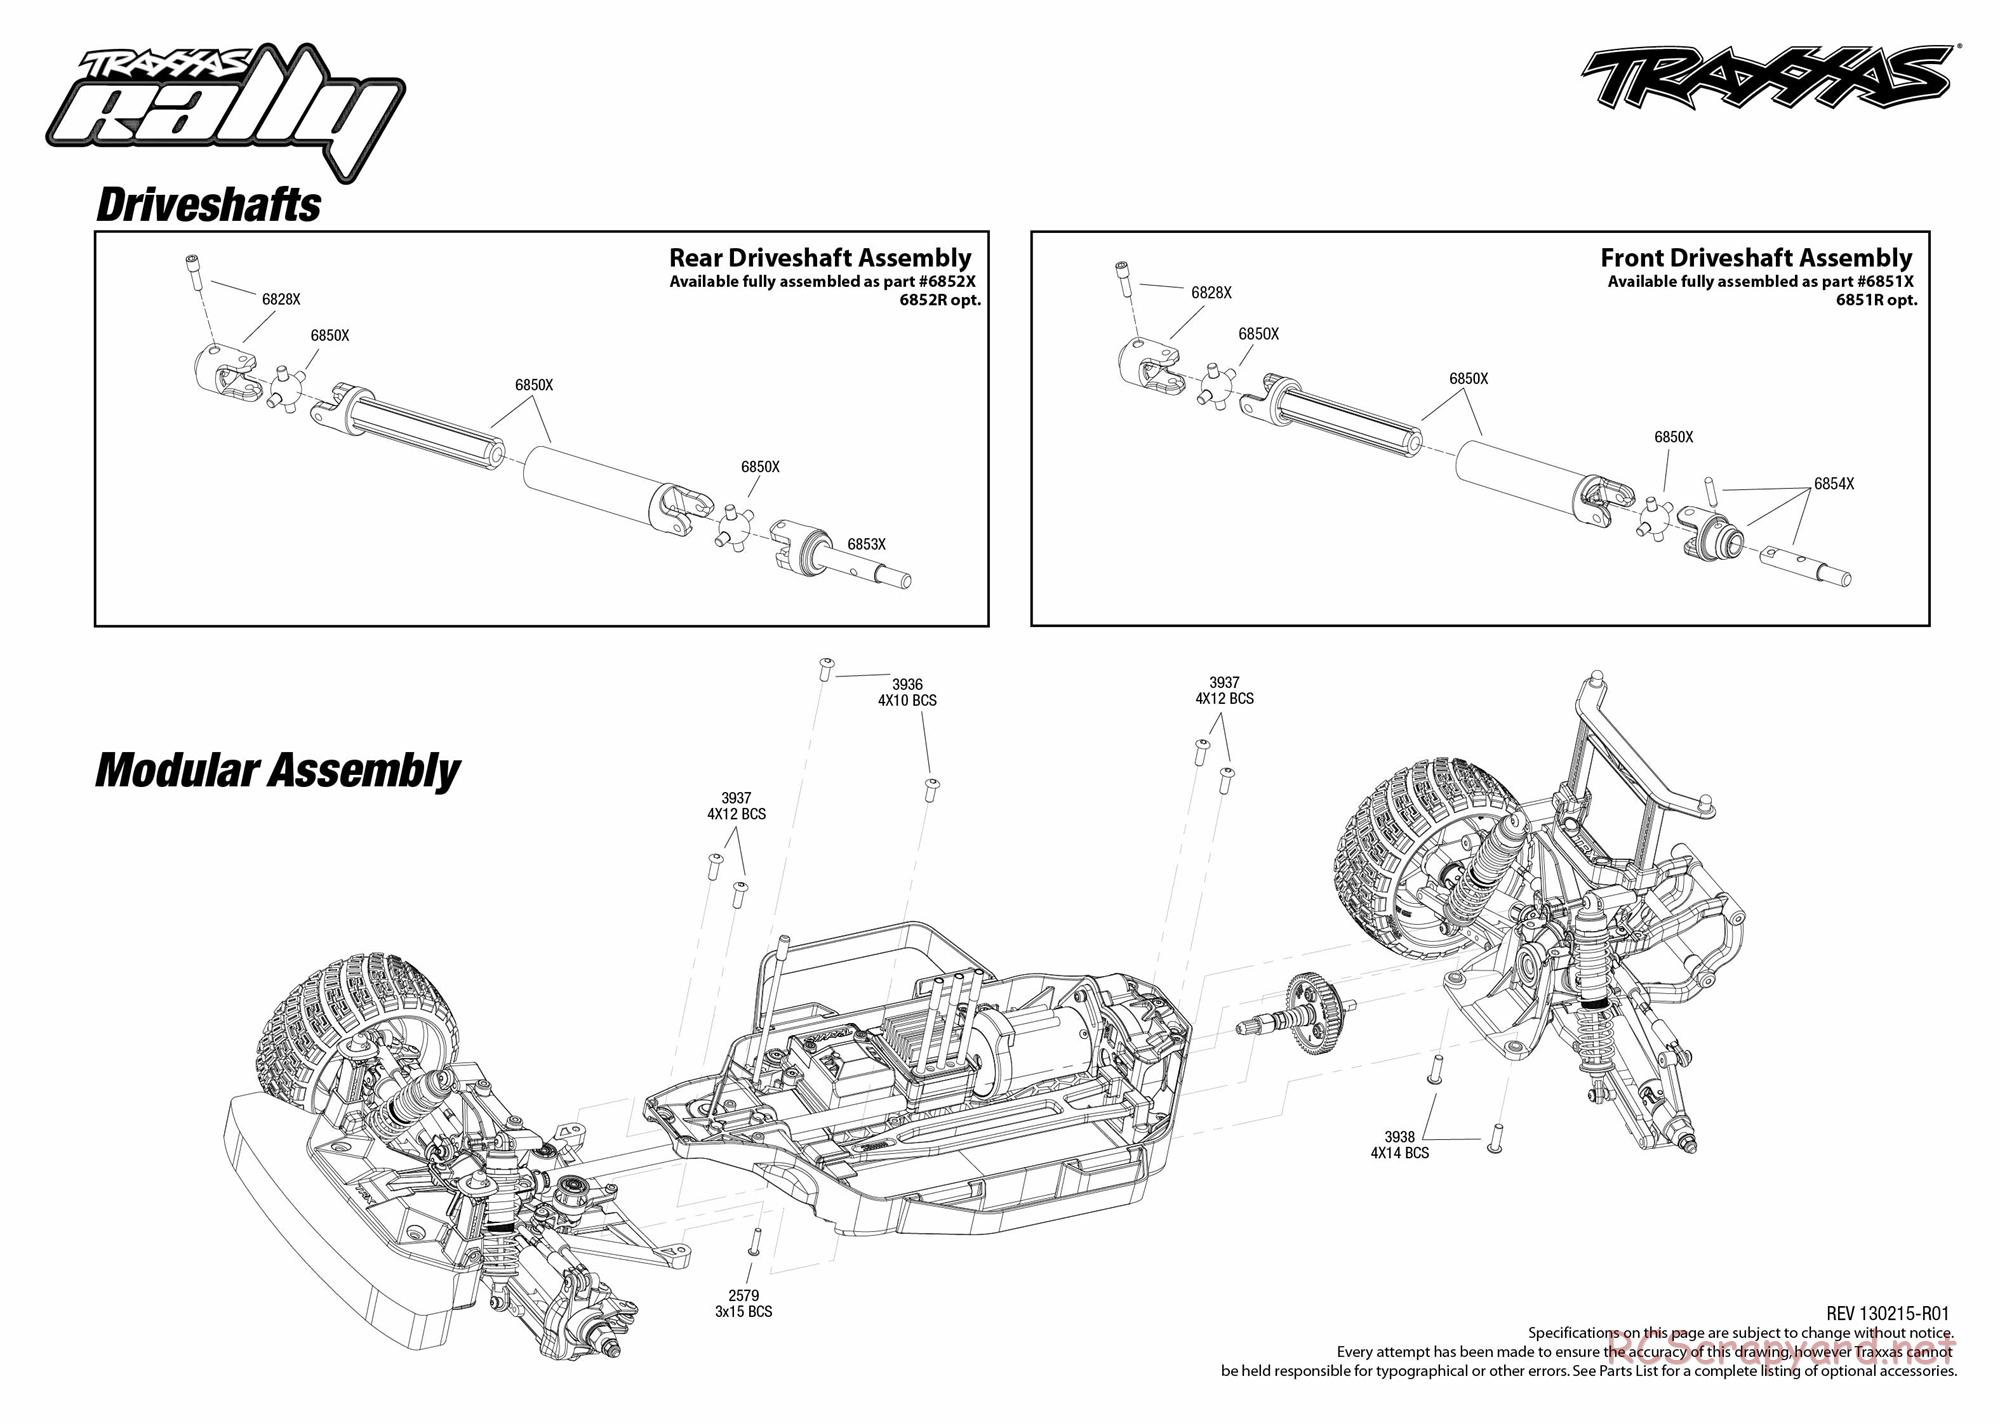 Traxxas - Rally (2012) - Exploded Views - Page 2